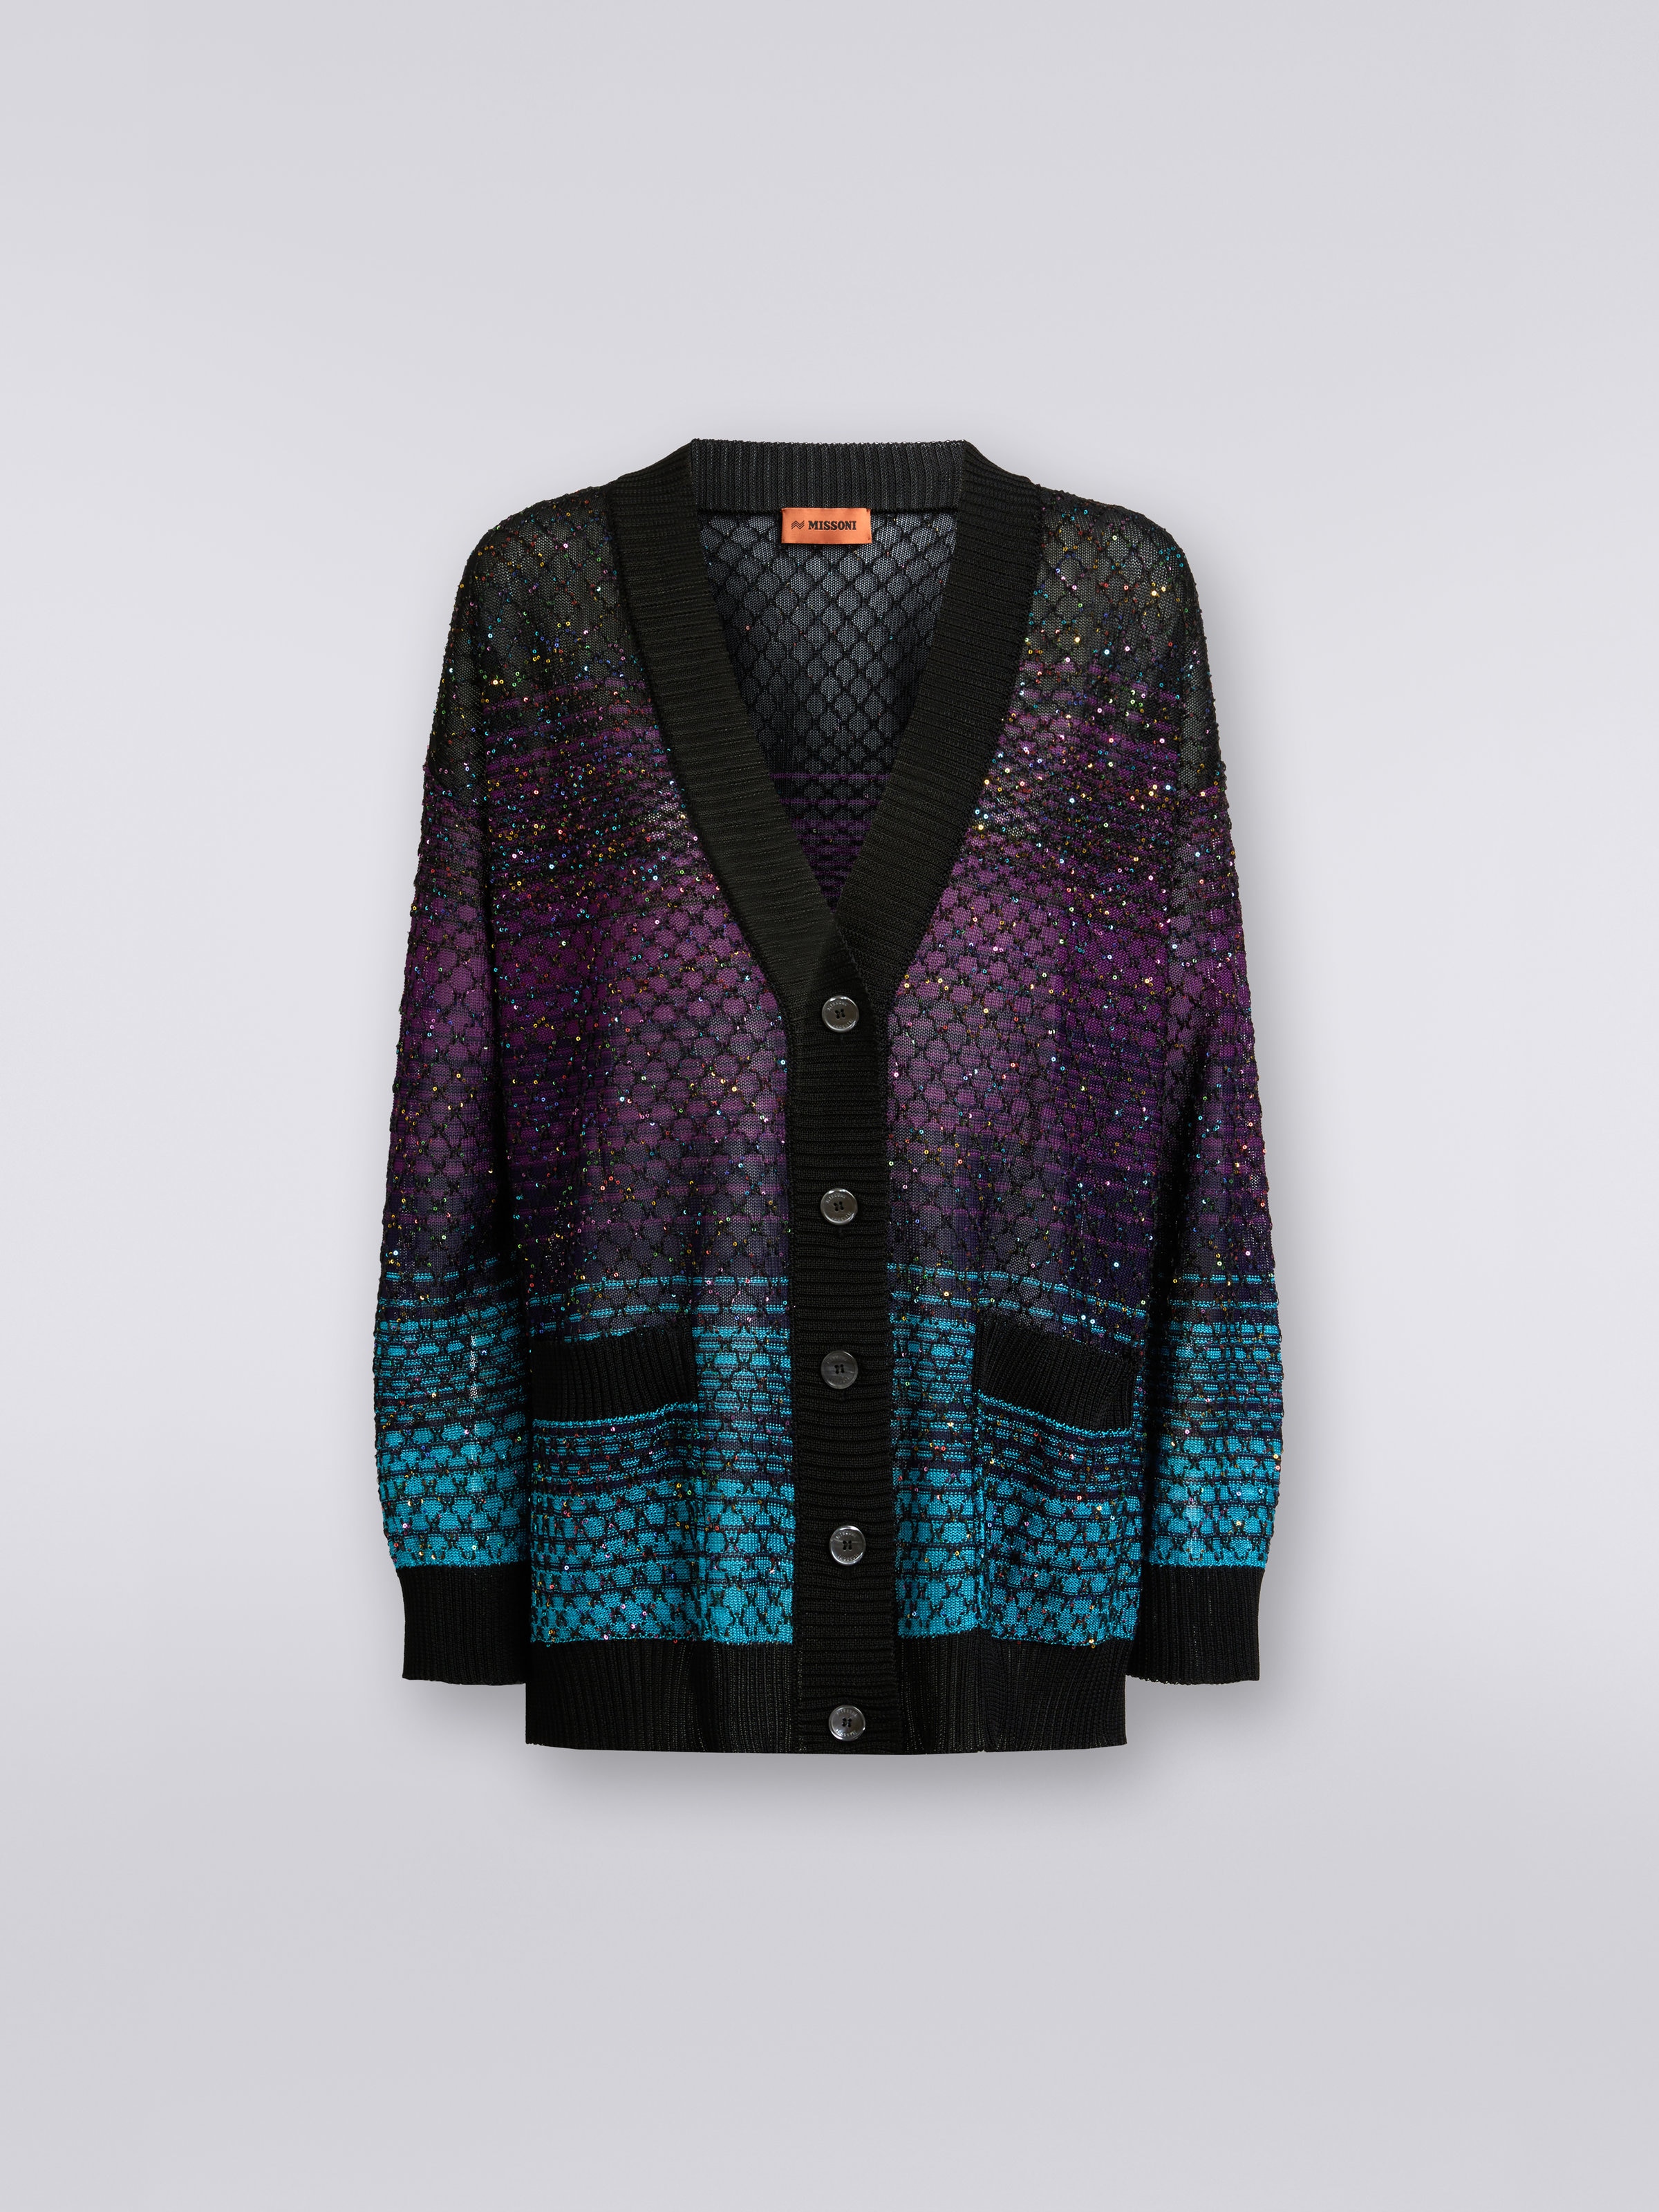 Oversized loose-knit cardigan with sequins, Turquoise, Purple & Black - 0